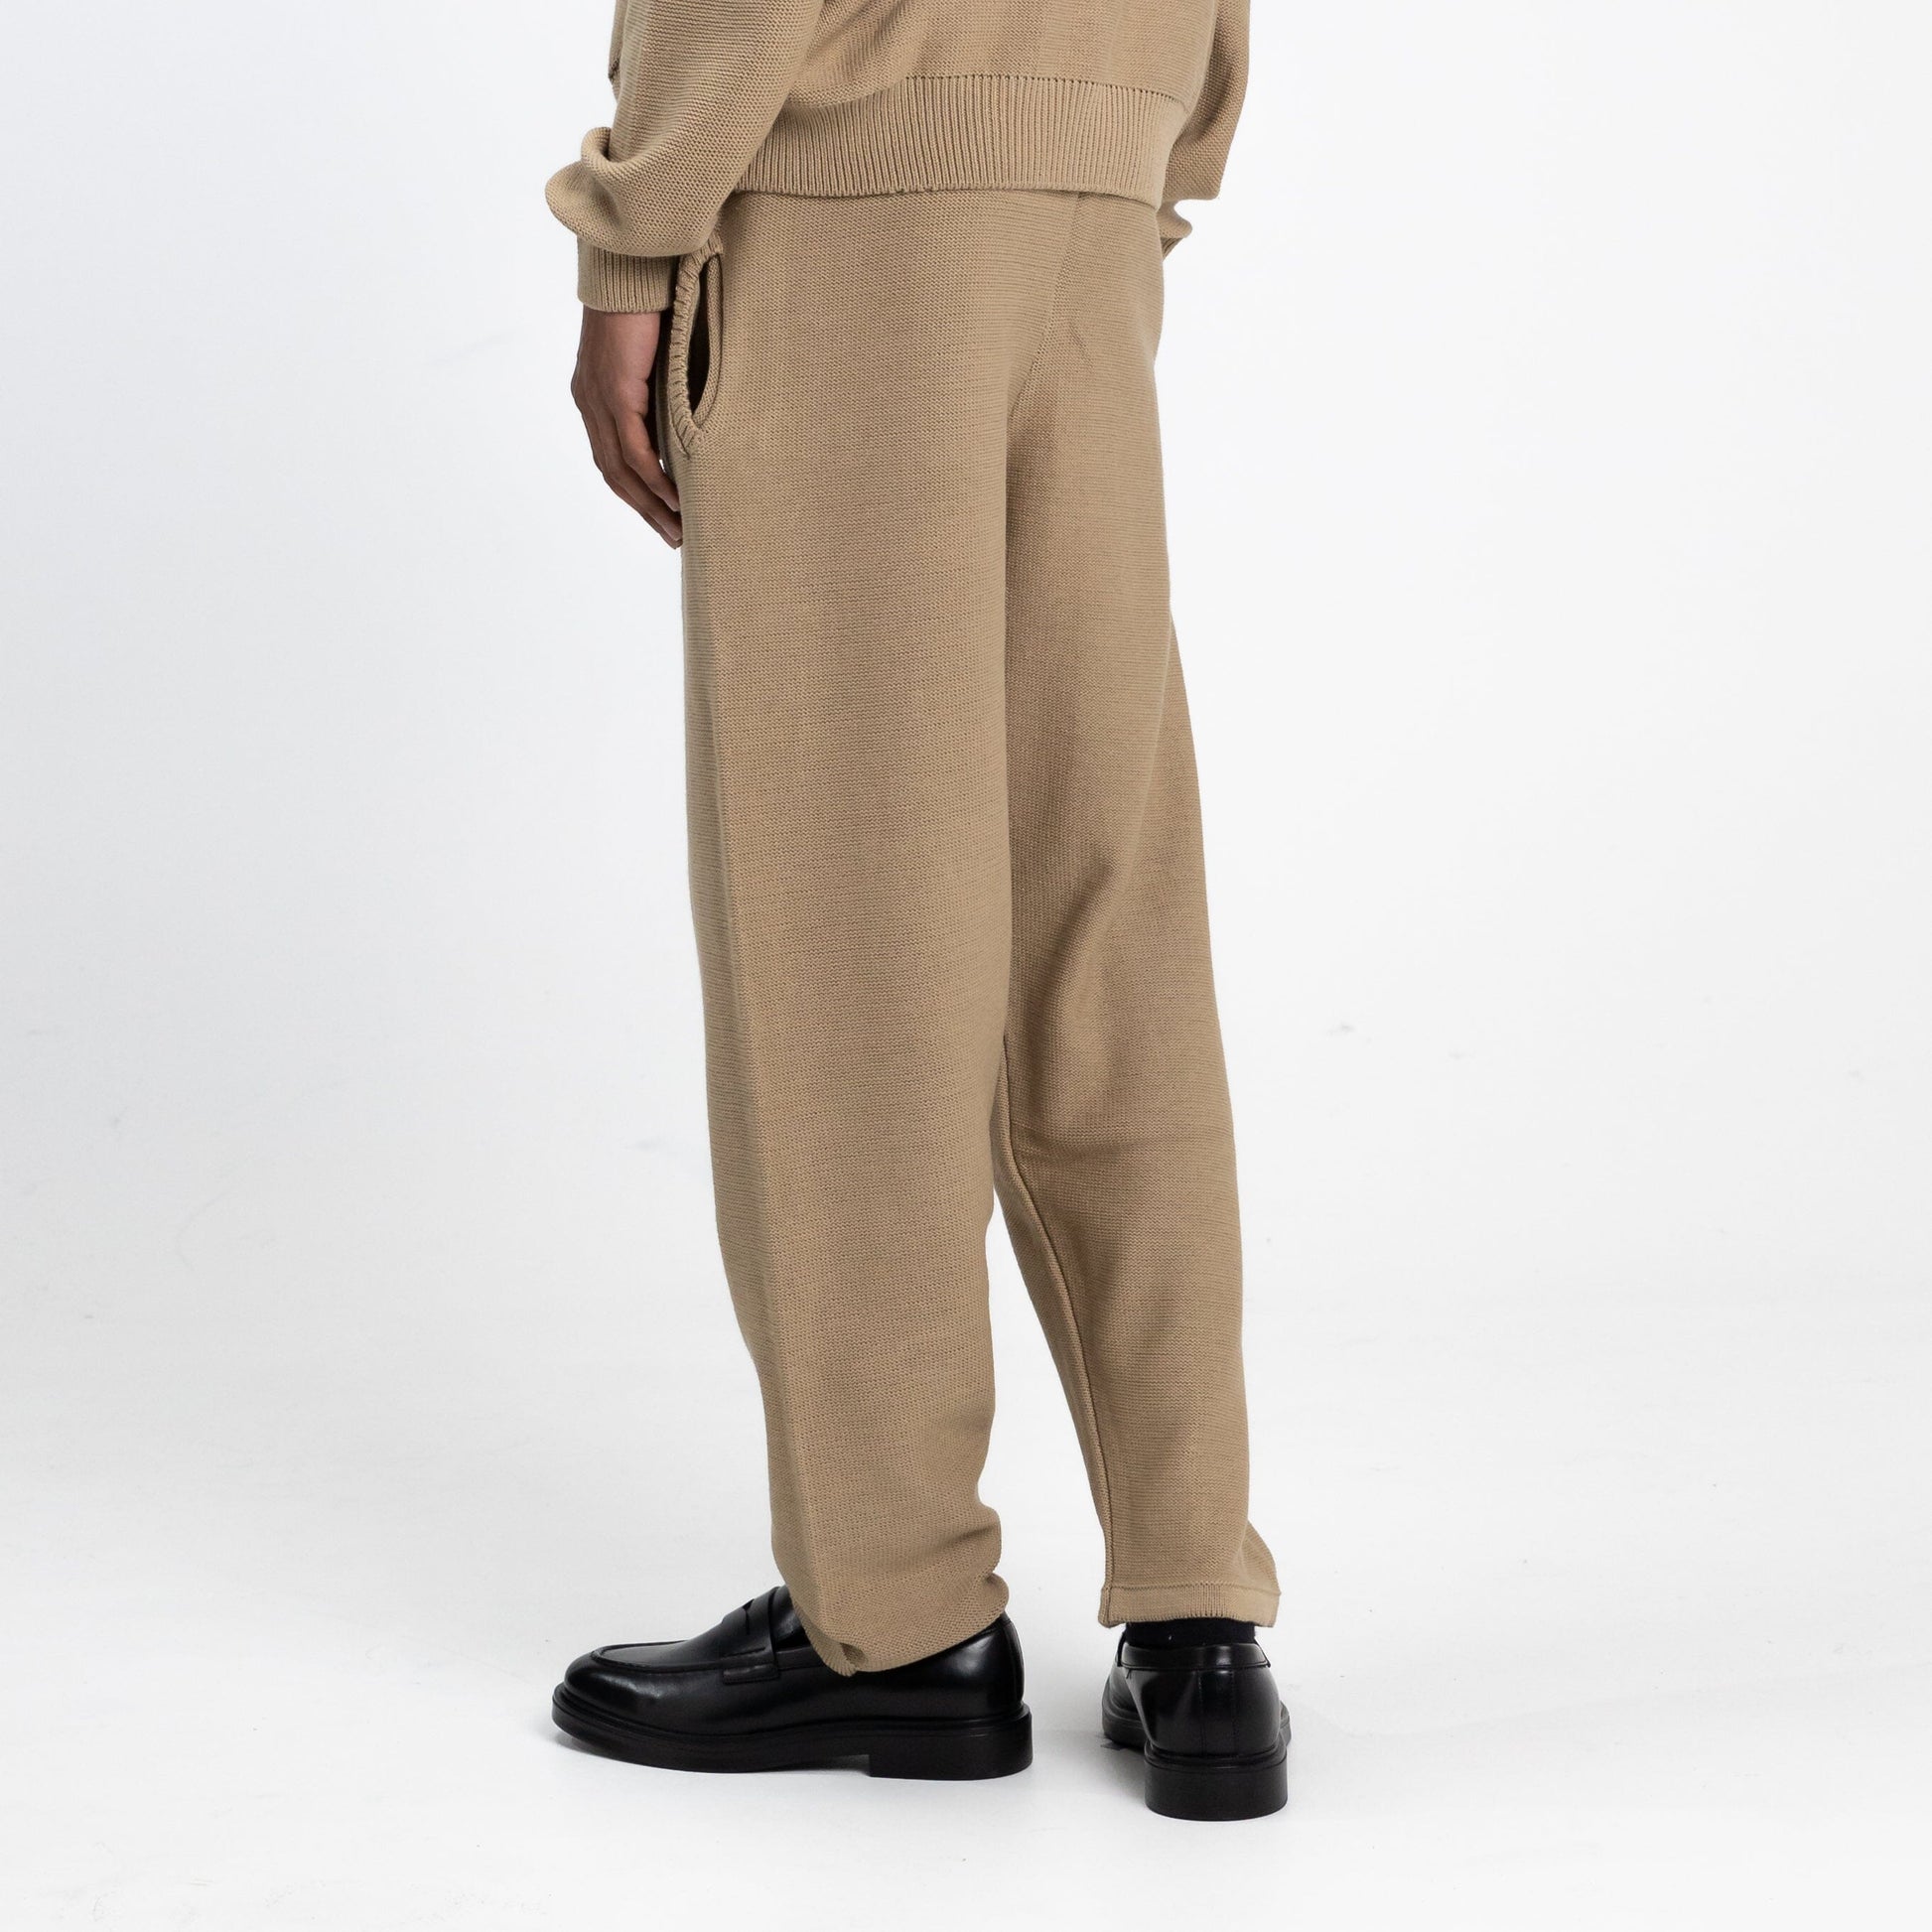 Knitted Pants in Brown